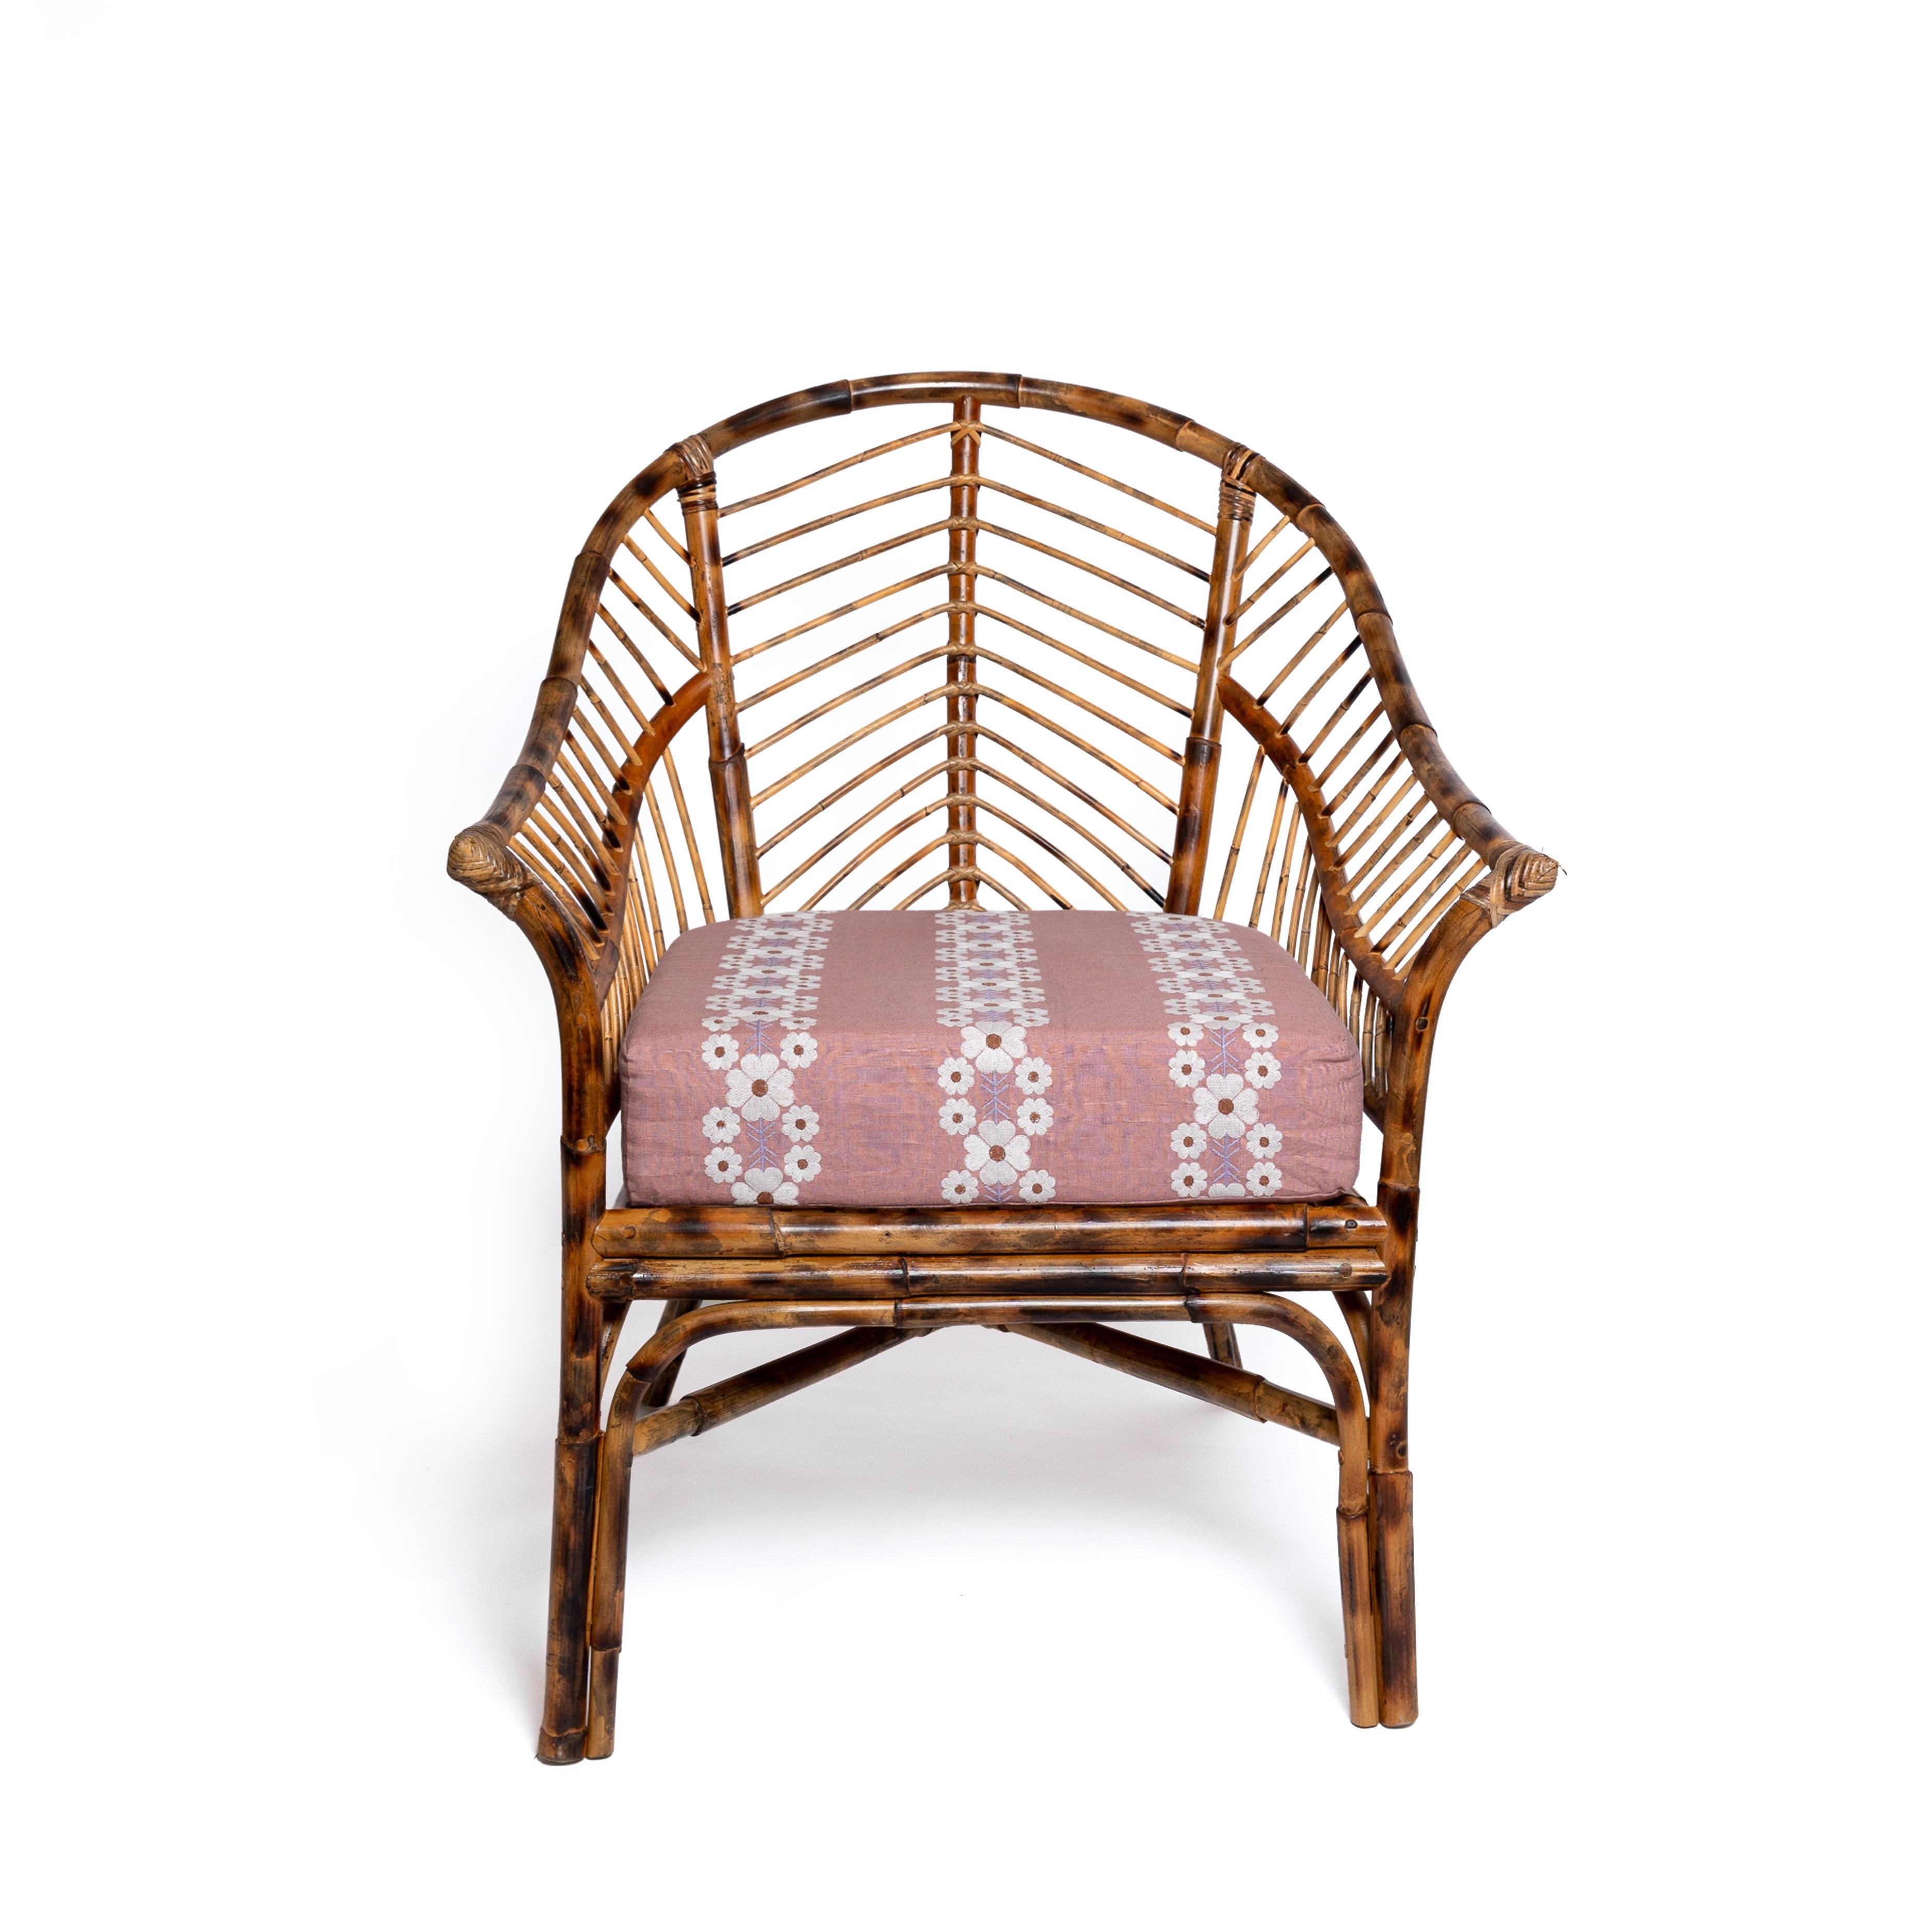 Indonesian Bamboo Chair in Natural Honey Rattan, Pink Cushion, Modern, by Louise Roe For Sale